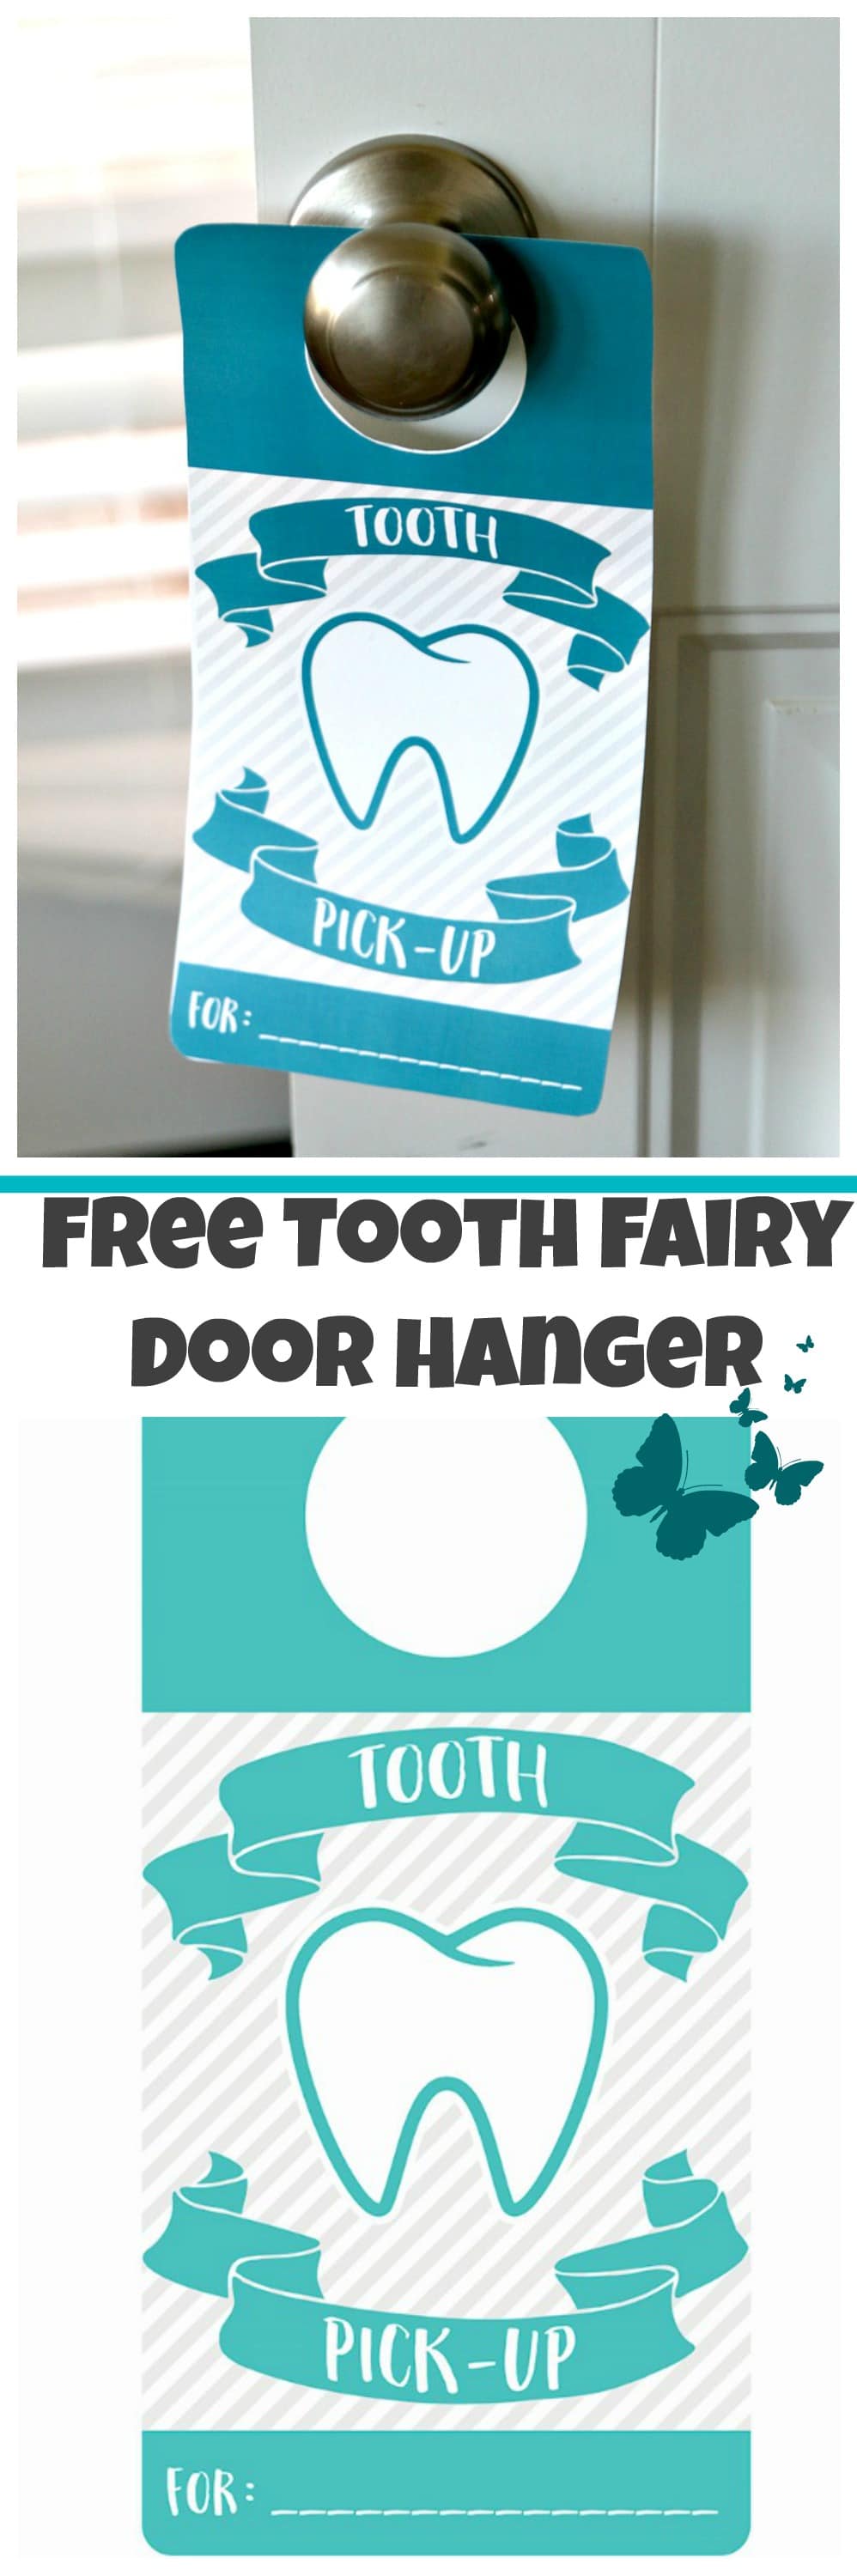 Tooth Fairy Door Hanger, FREE PRINTABLE to notify the tooth fairy where to grab her tooth!